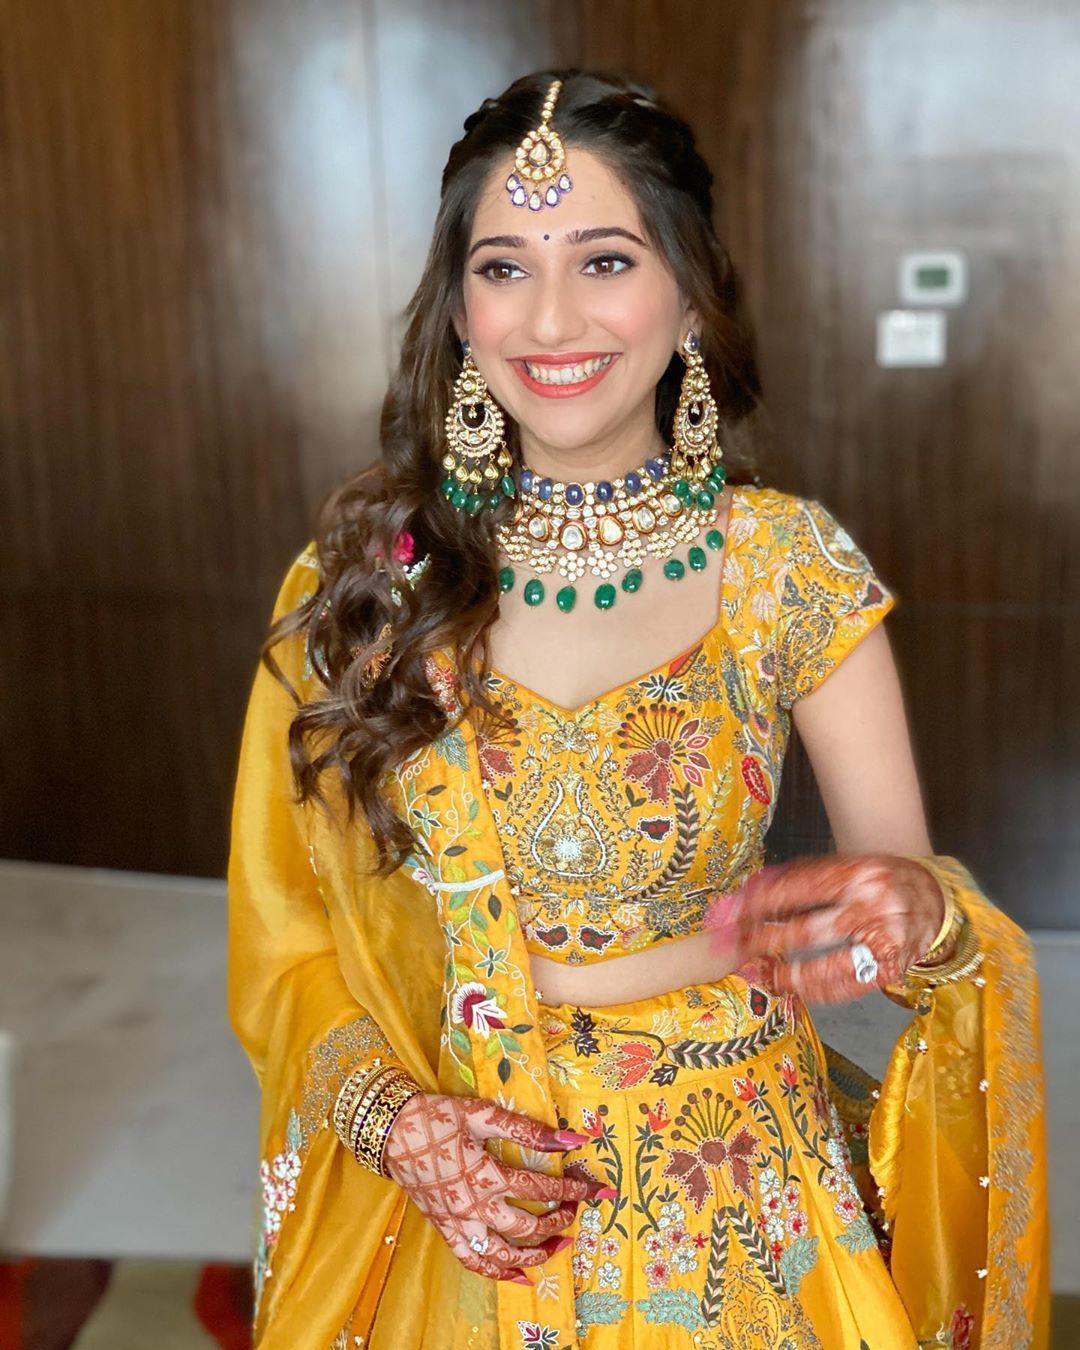 Manish Malhotra Bride Wore A Pineapple Yellow Lehenga For Wedding And A  Unique Outfit For 'Sangeet'